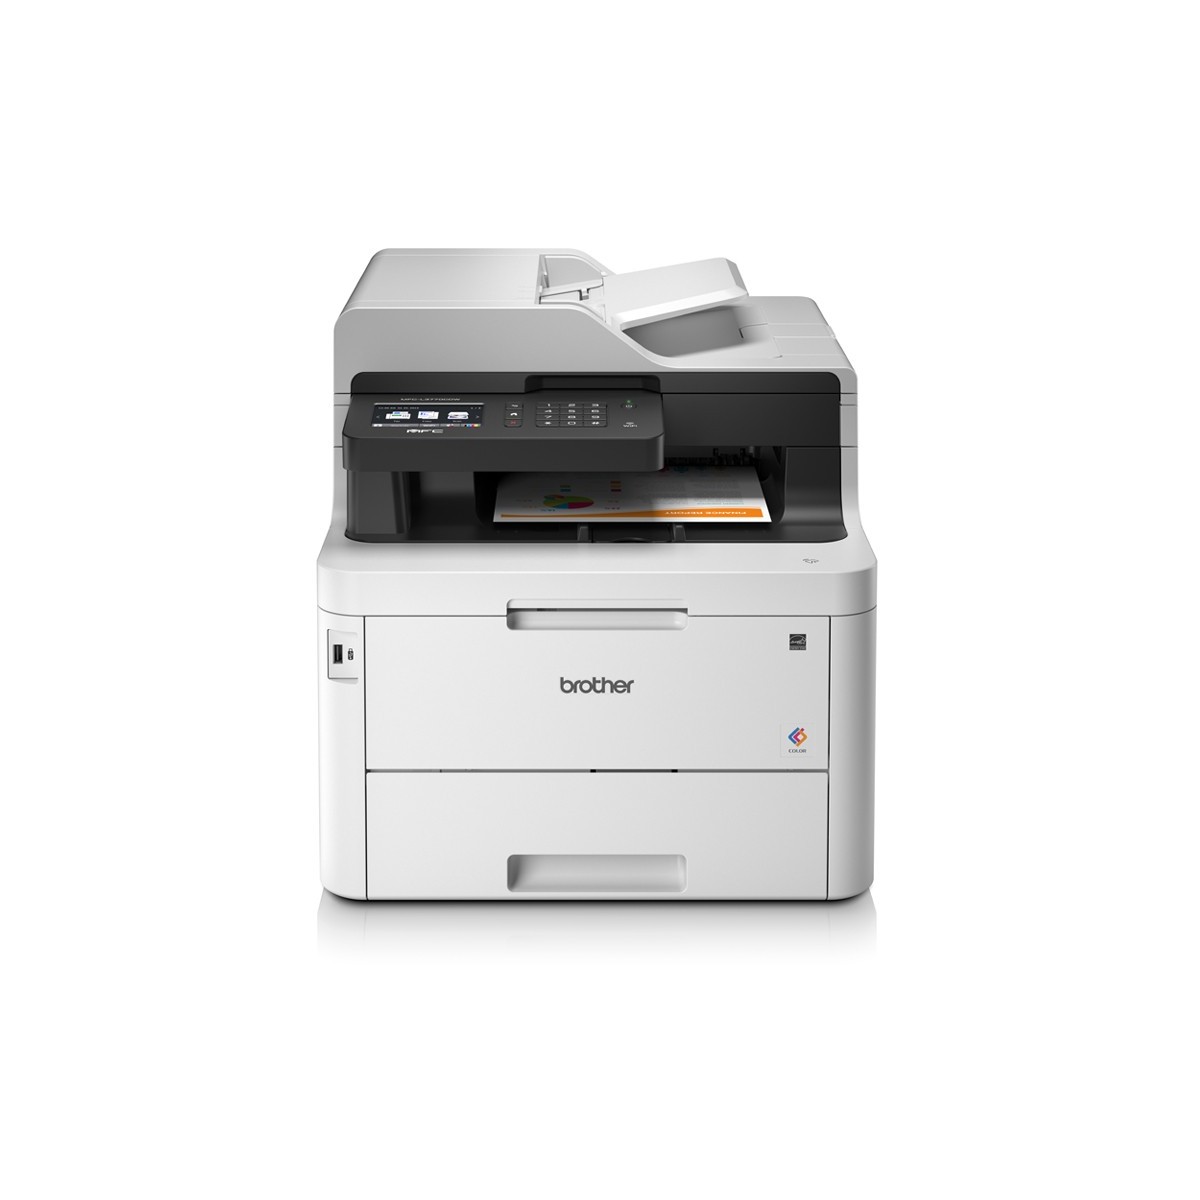 Brother MFC-L3770CDW - LED - Colour printing - 2400 x 600 DPI - A4 - Direct printing - Black - White